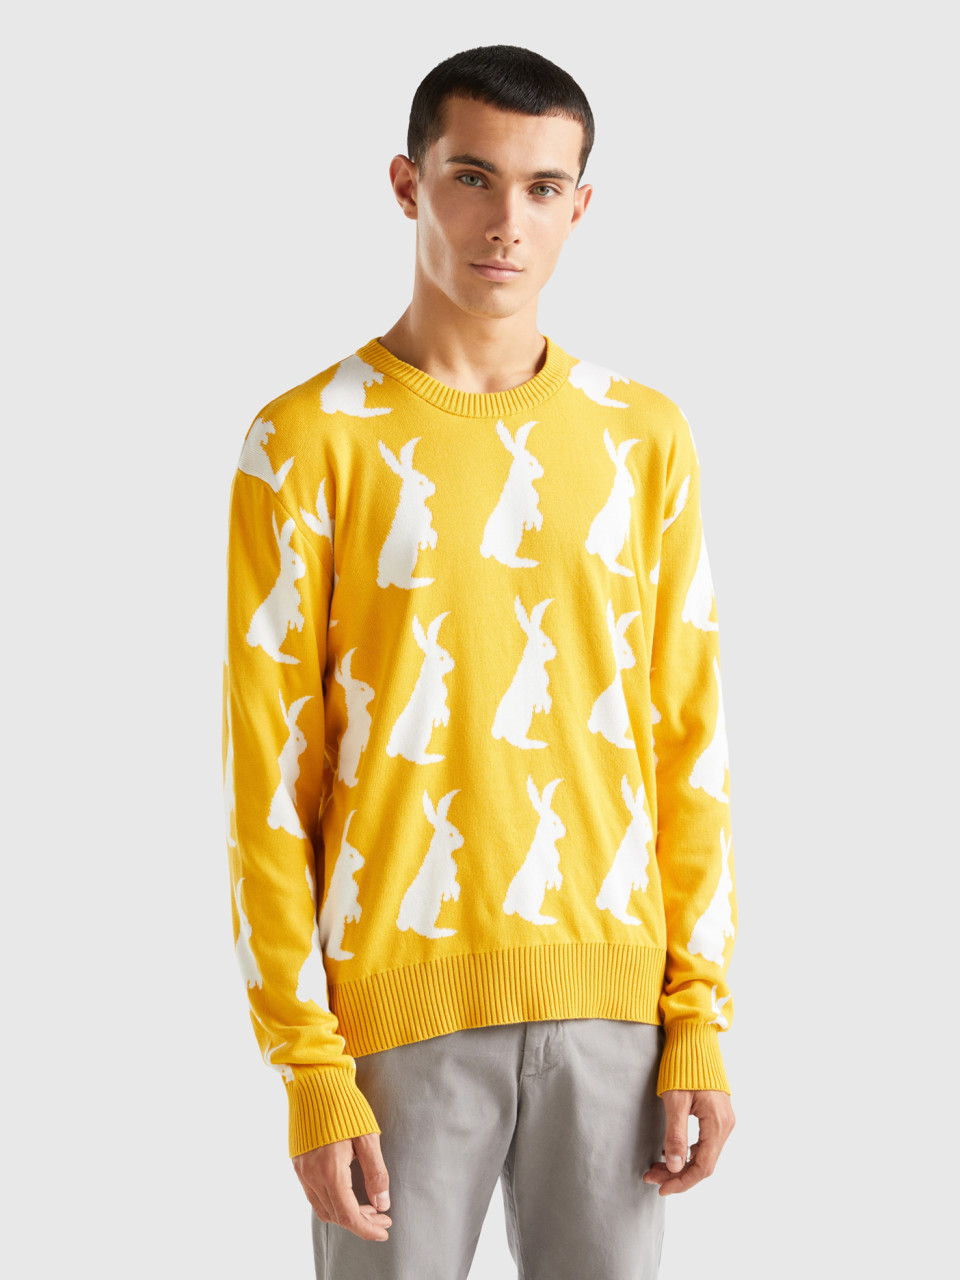 Benetton, Sweater With Bunny Pattern, Yellow, Men